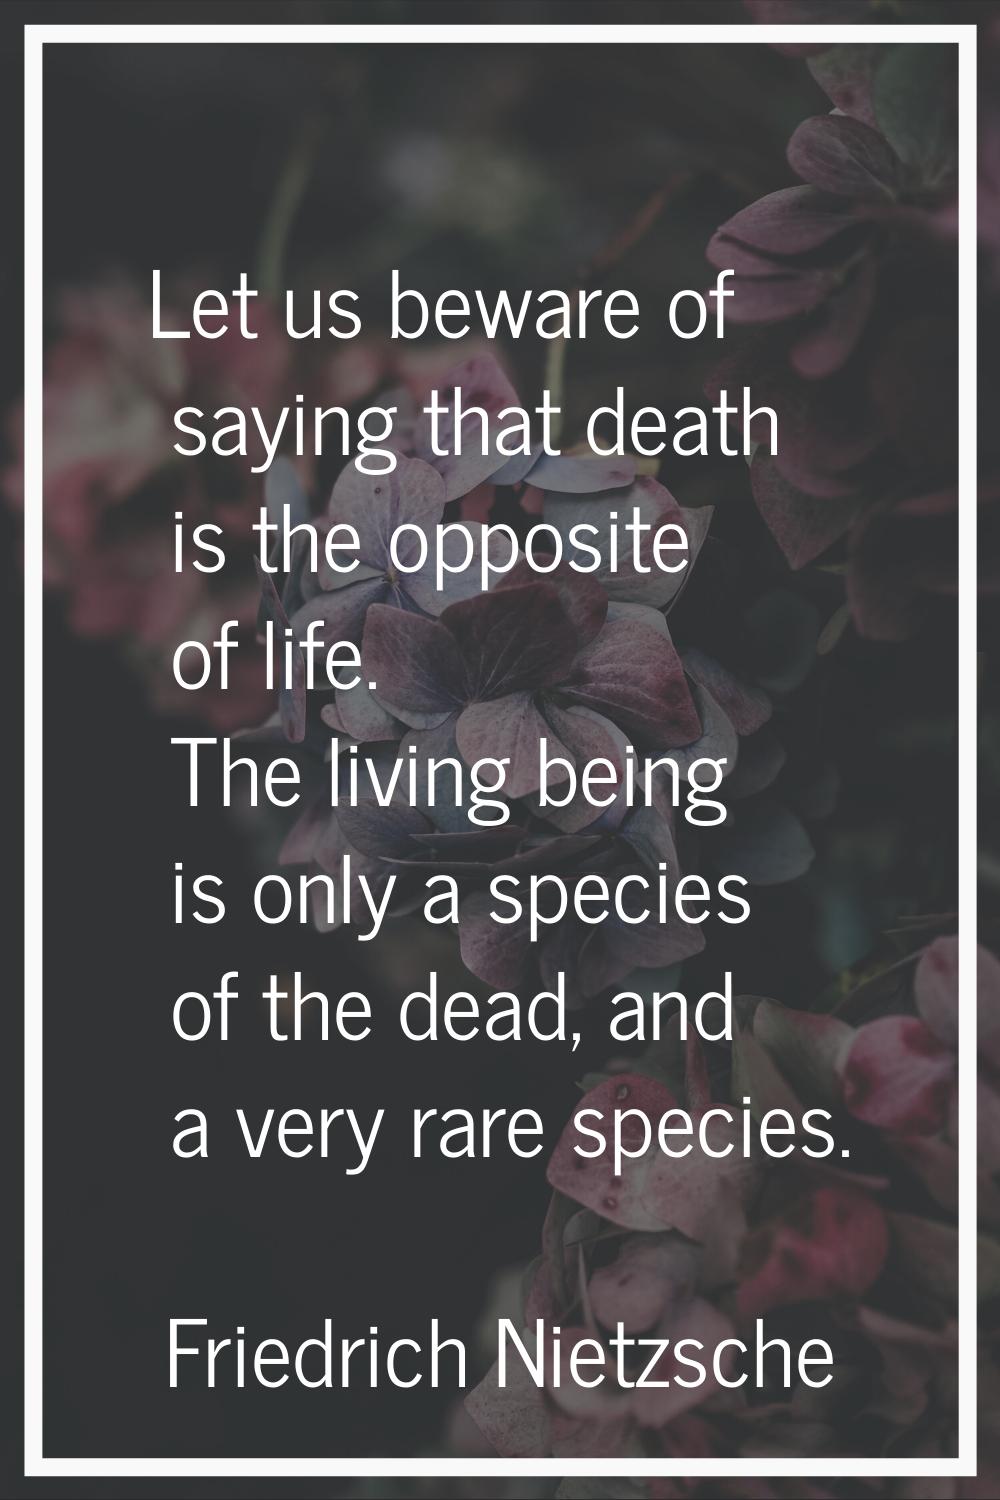 Let us beware of saying that death is the opposite of life. The living being is only a species of t